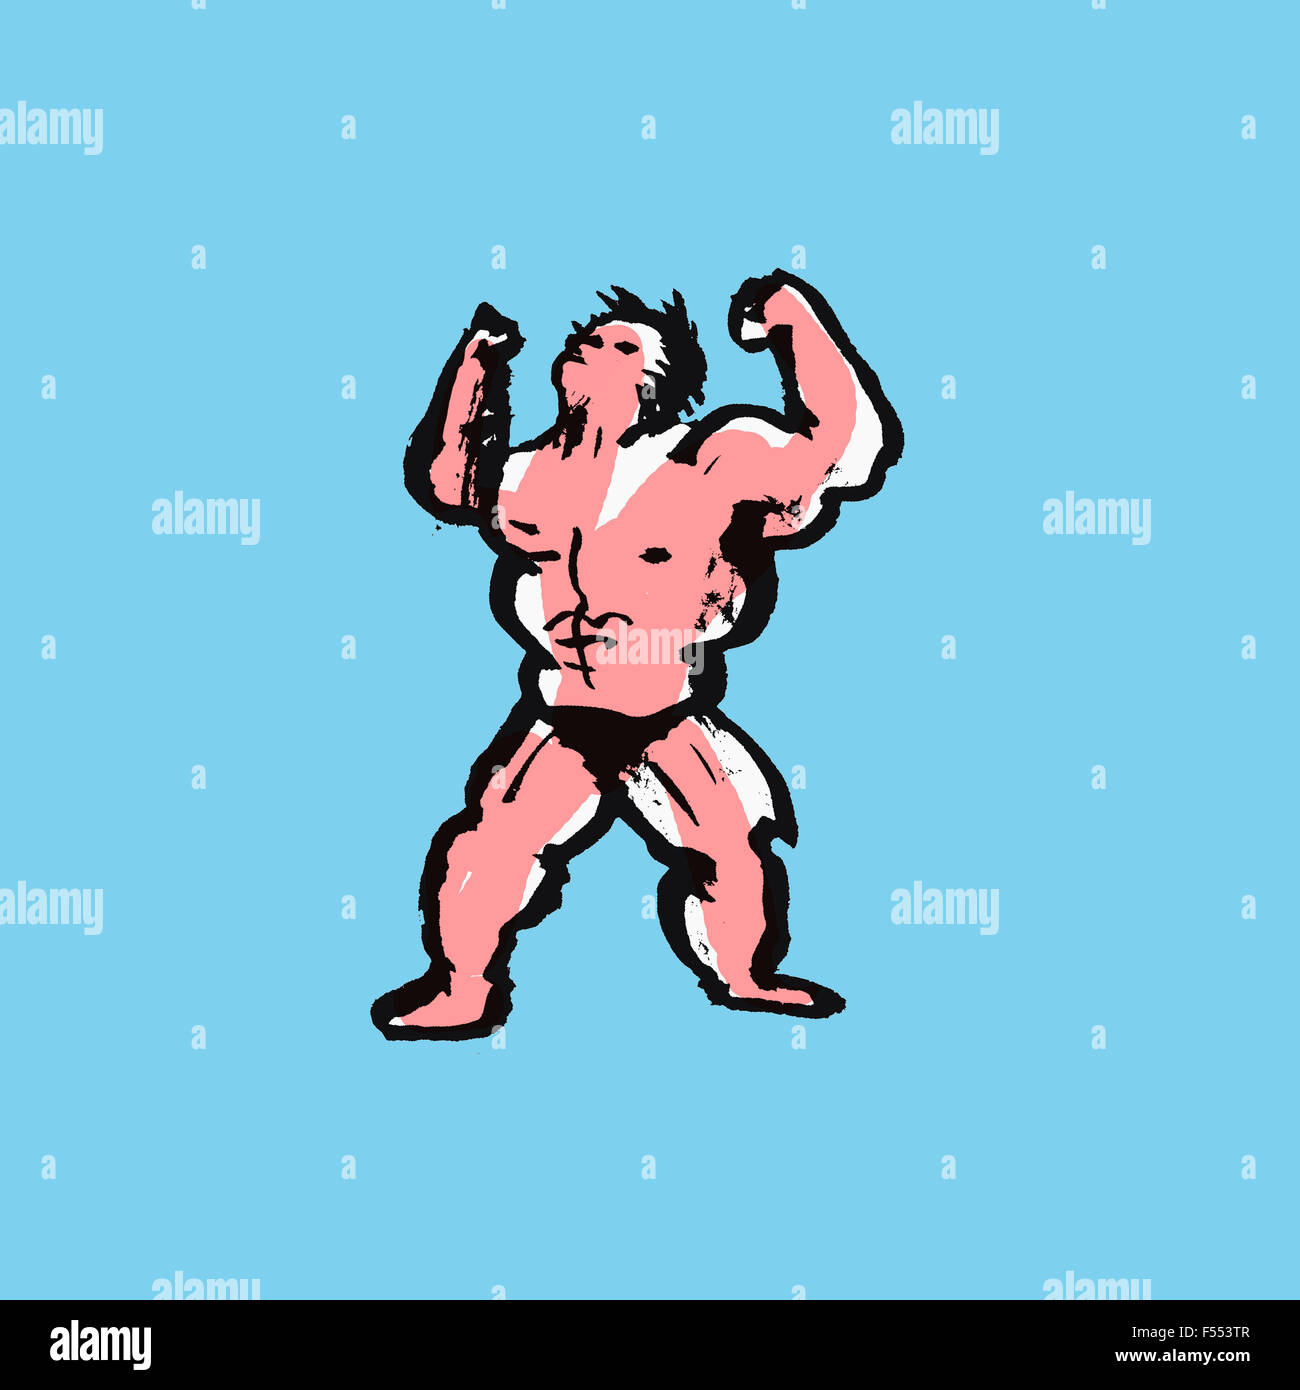 Illustration of man flexing his muscles against blue background Stock Photo